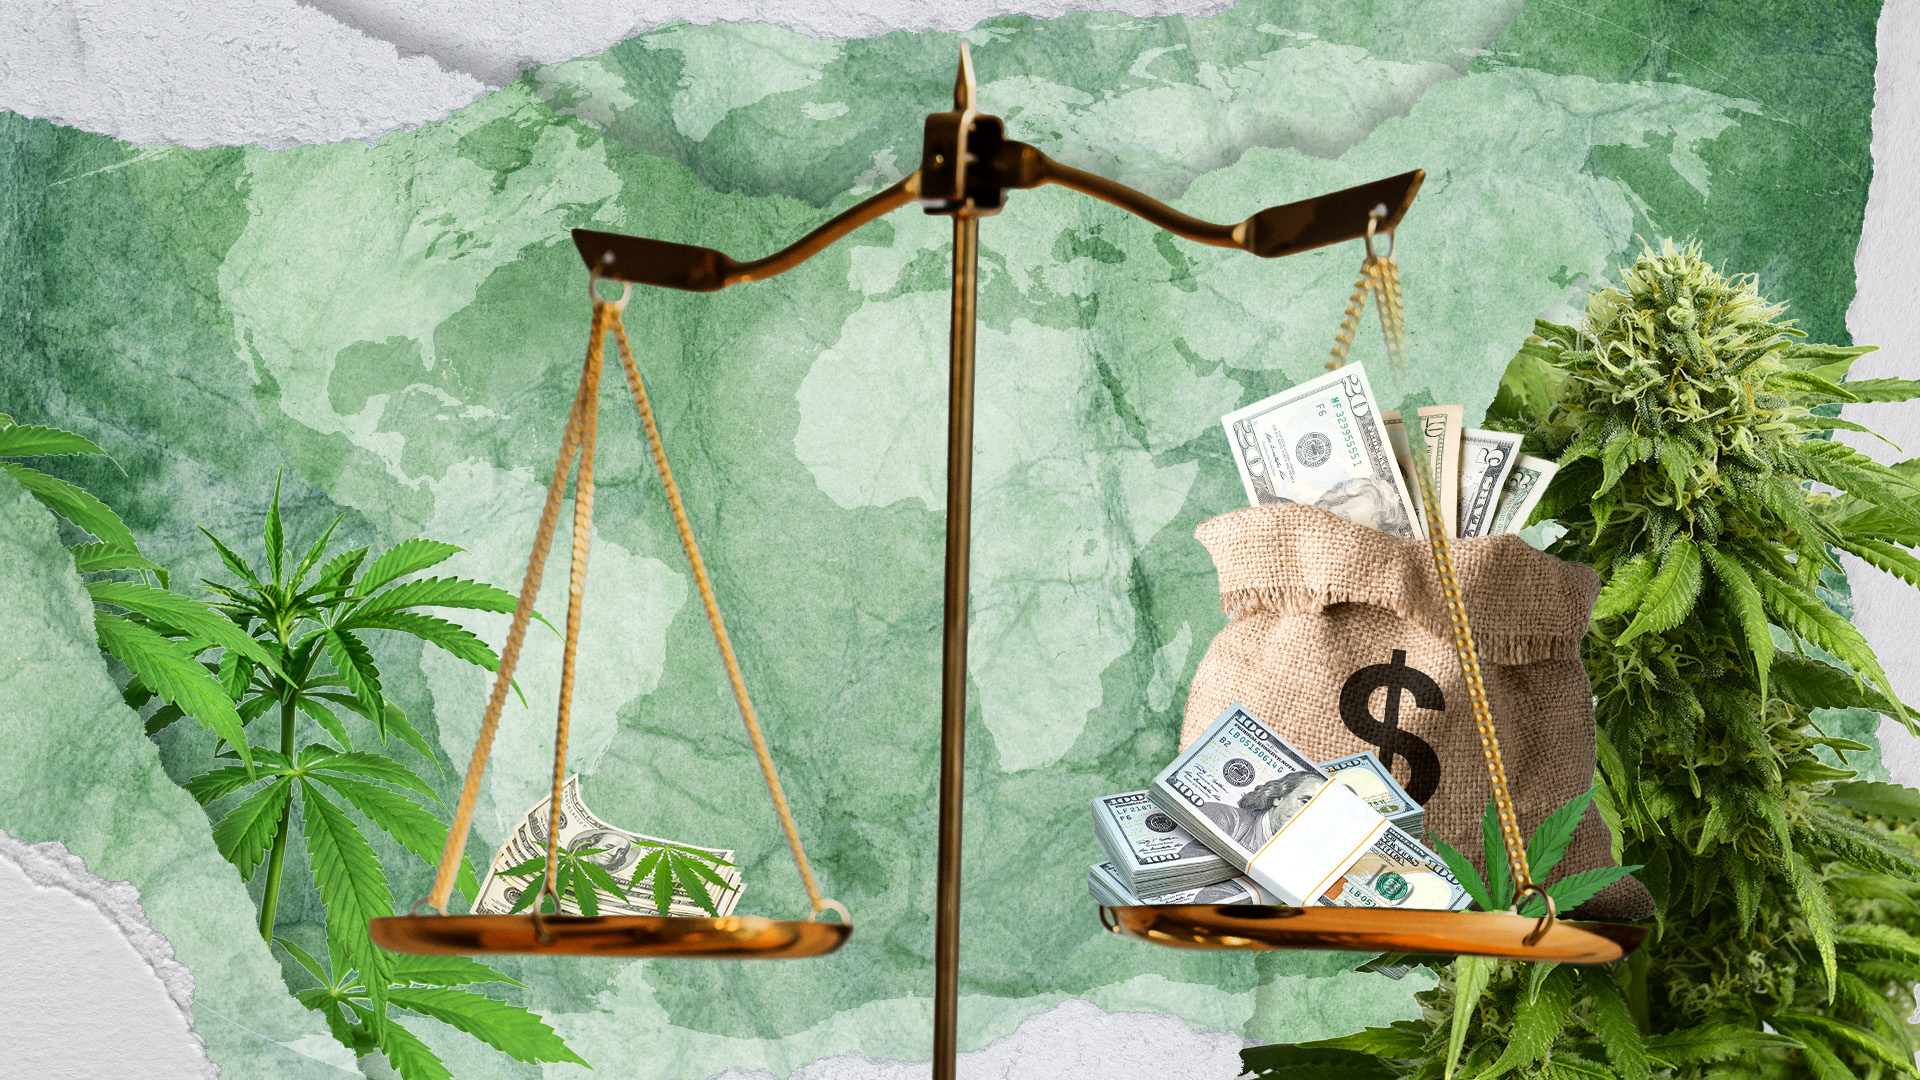 The Cost of Cannabis: See the Top 5 Most and Least Expensive Cities in the World